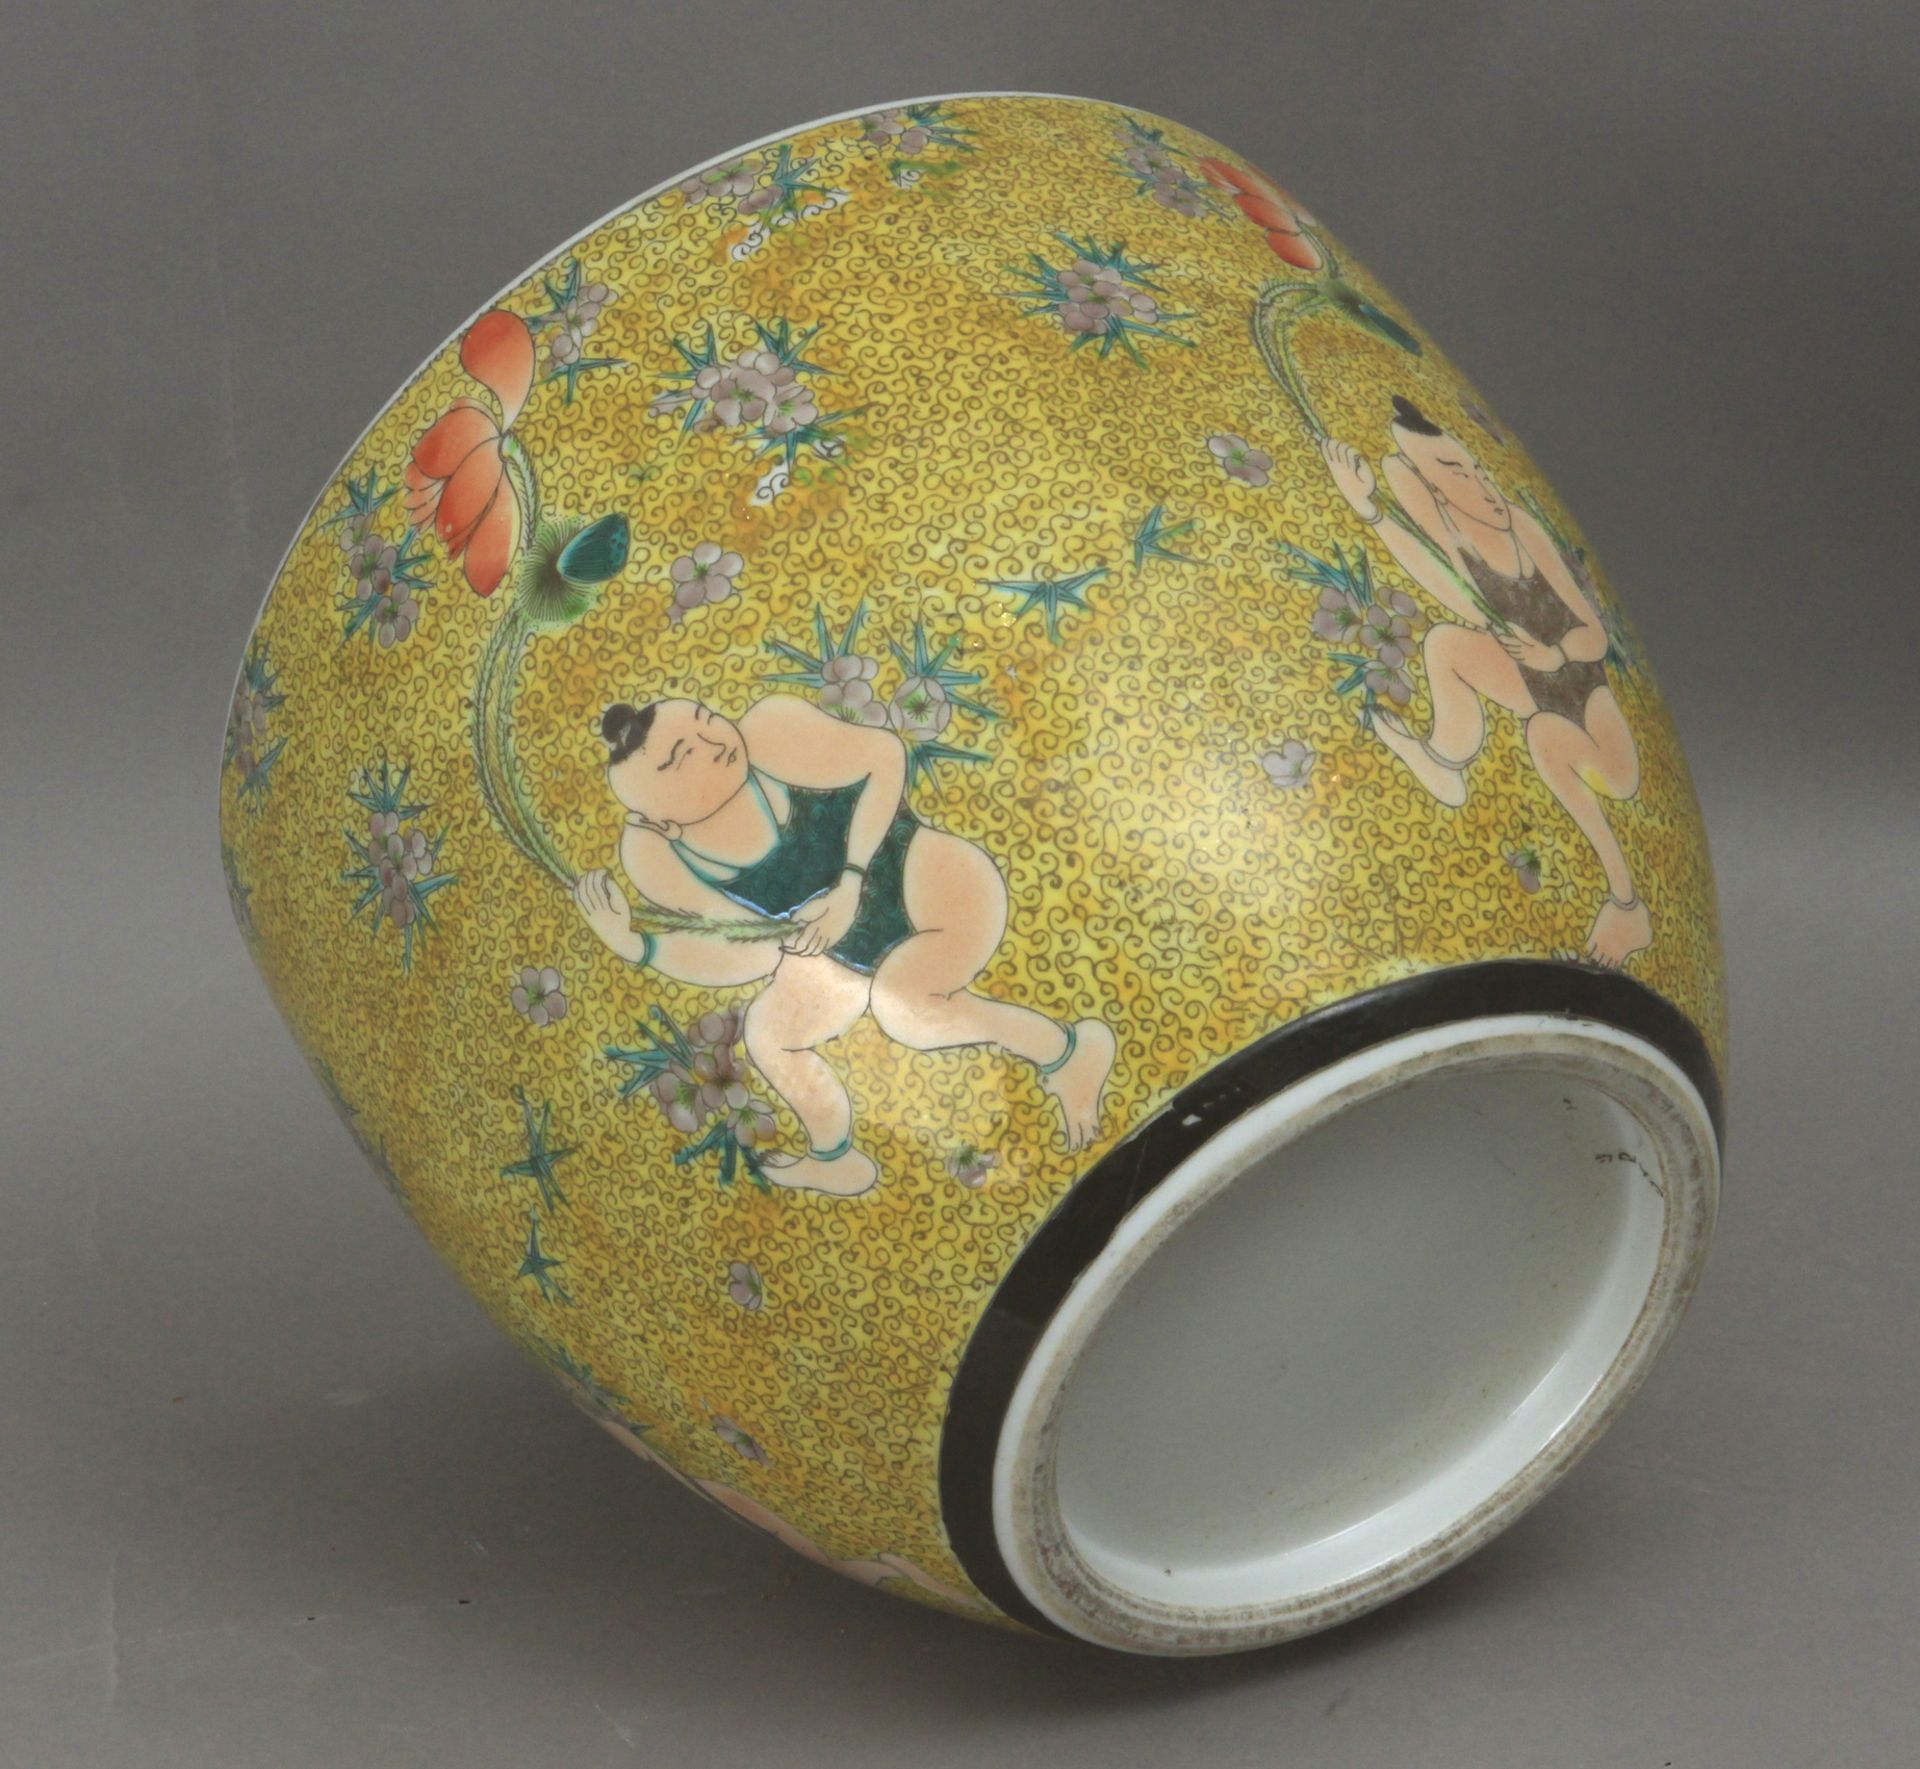 A 19th century Chinese cache pot in Famille Rose porcelain - Image 3 of 3